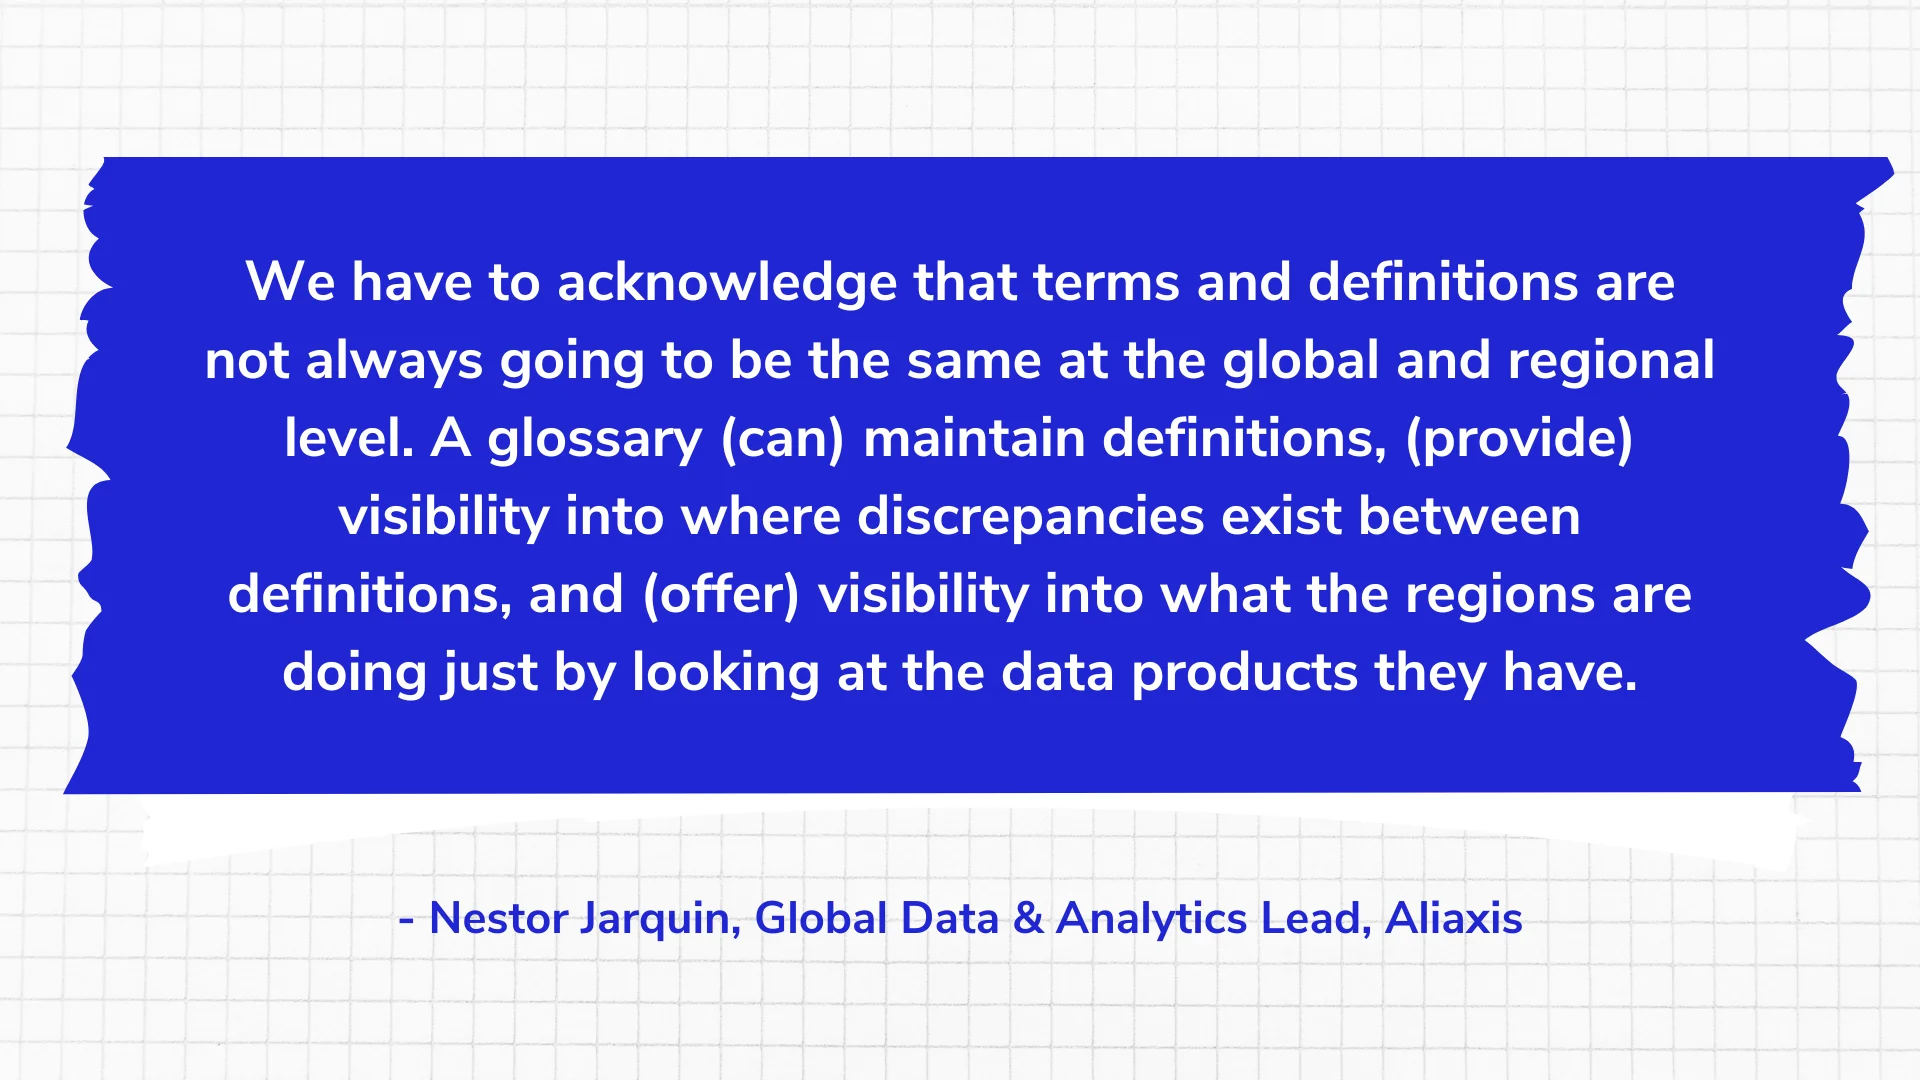 We have to acknowledge that terms and definitions are not always going to be the same at the global and regional level. A glossary (can) maintain definitions, (provide) visibility into where discrepancies exist between definitions, and (offer) visibility into what the regions are doing just by looking at the data products they have